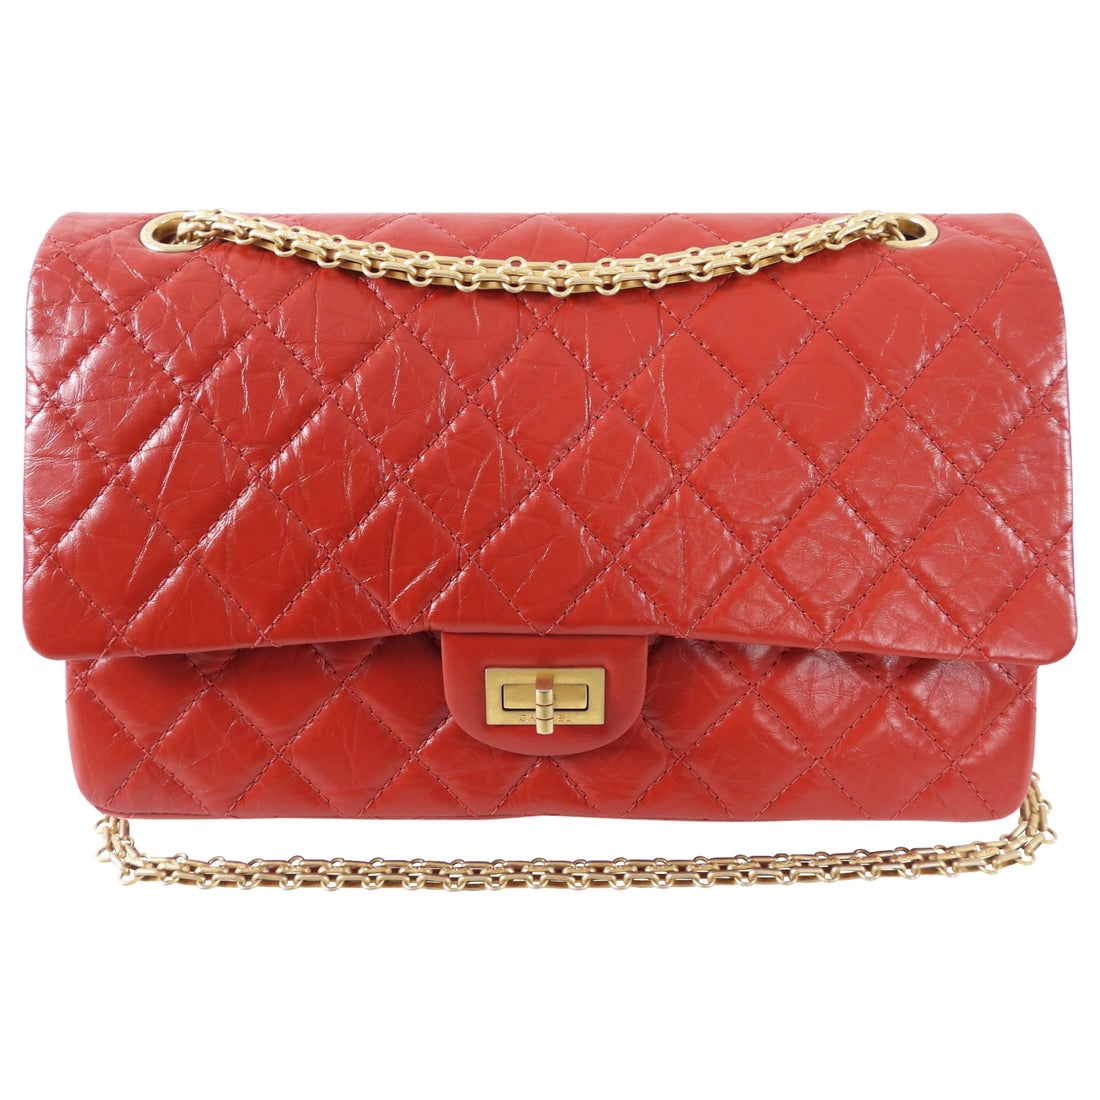 Chanel 2.55 Reissue 226 Large Red Aged Calfskin GHW Flap Bag